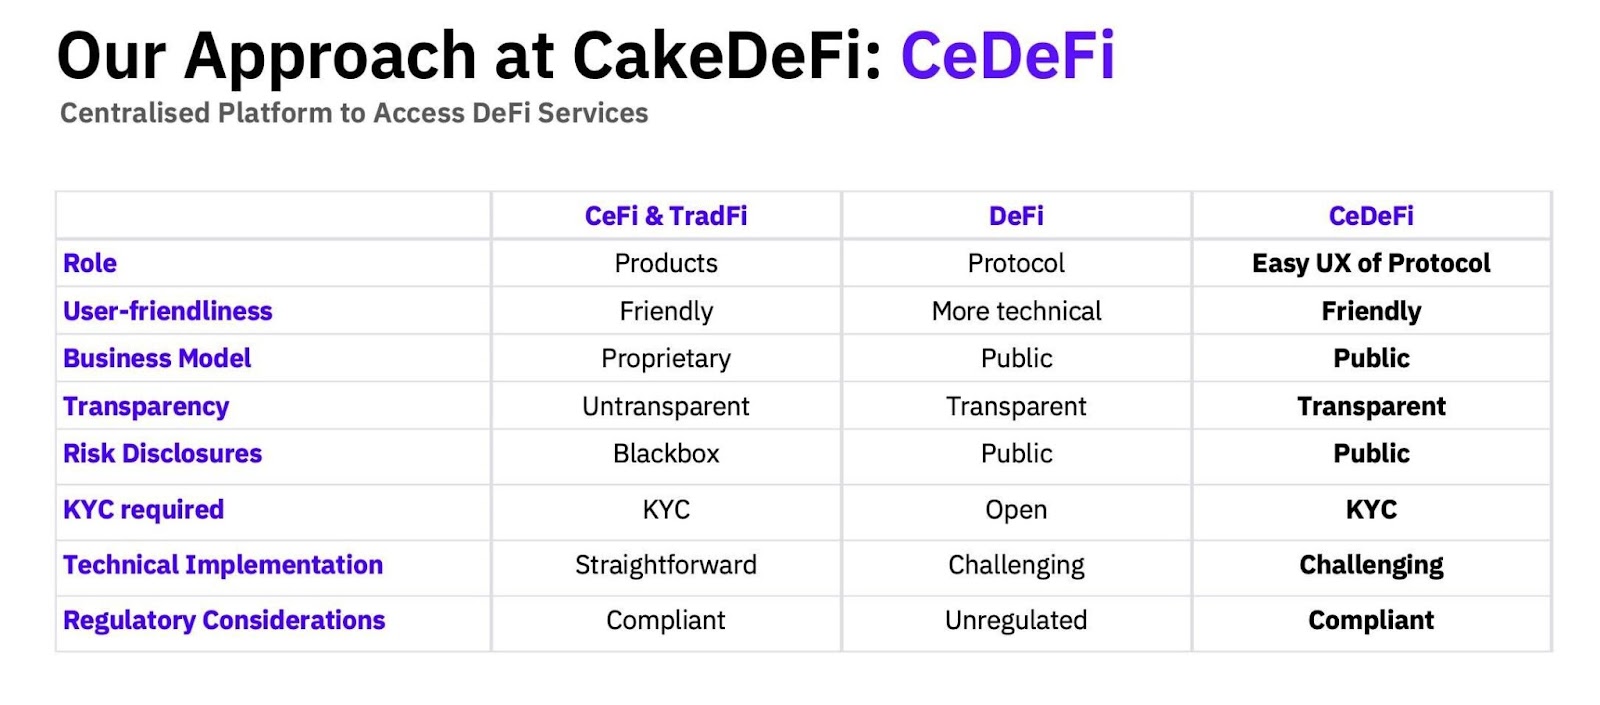 What is TradFi, CeFi and DeFi? Is CeDeFi going to rule the crypto world?